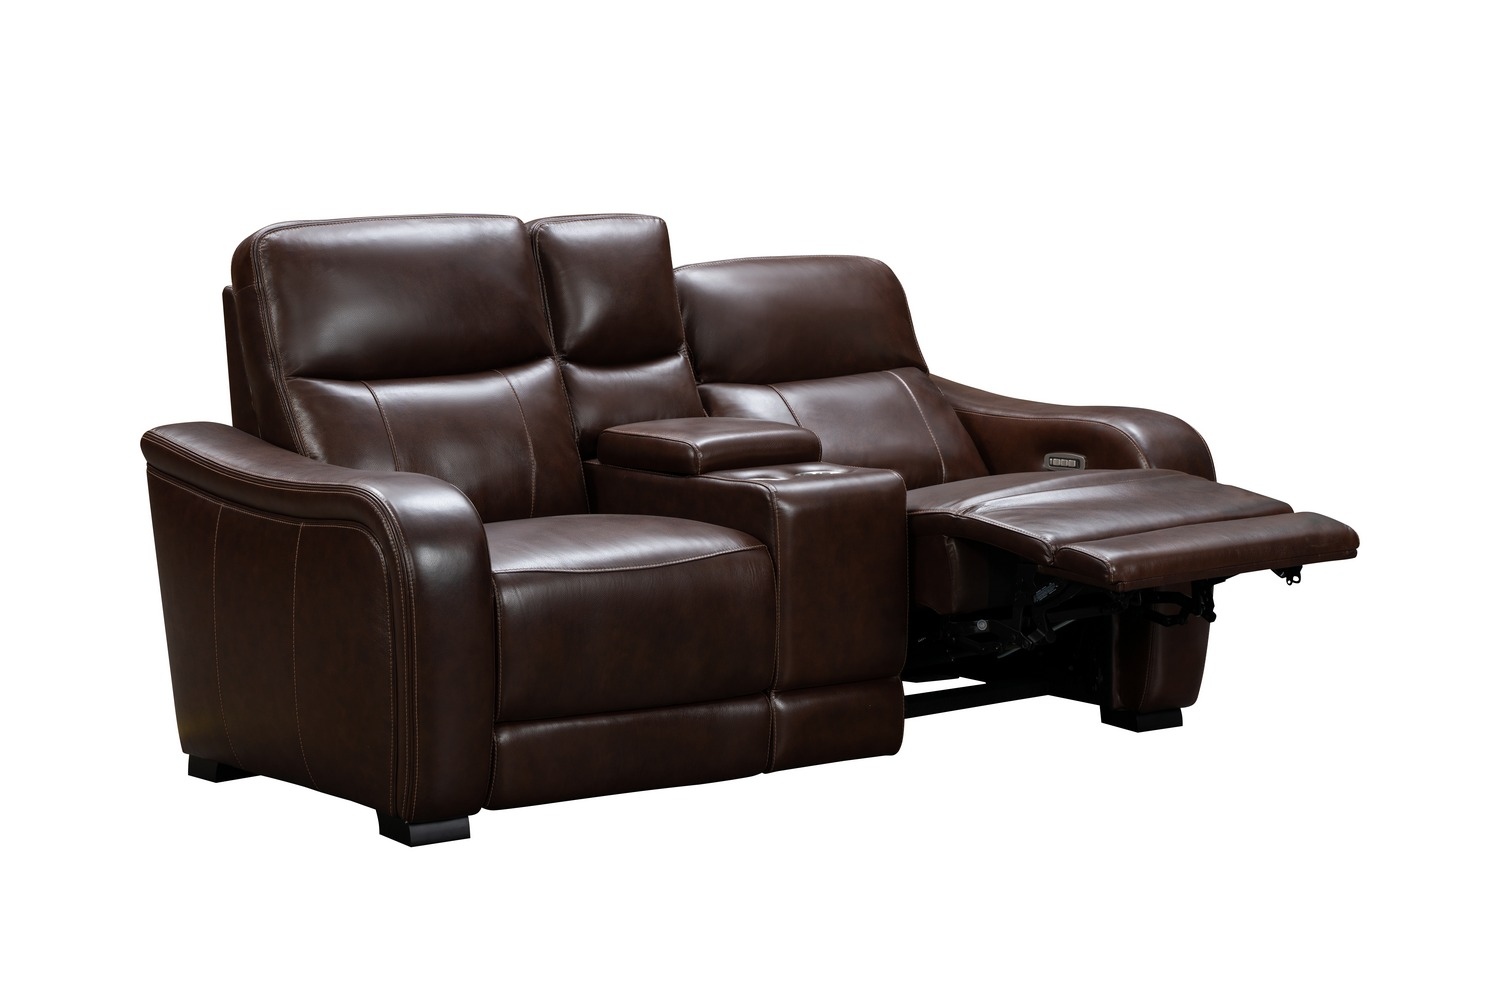 Barcalounger Electra Power Reclining Console Loveseat with Power Head Rests and Power Lumbar - Castleton Rustic Brown/Leather Match